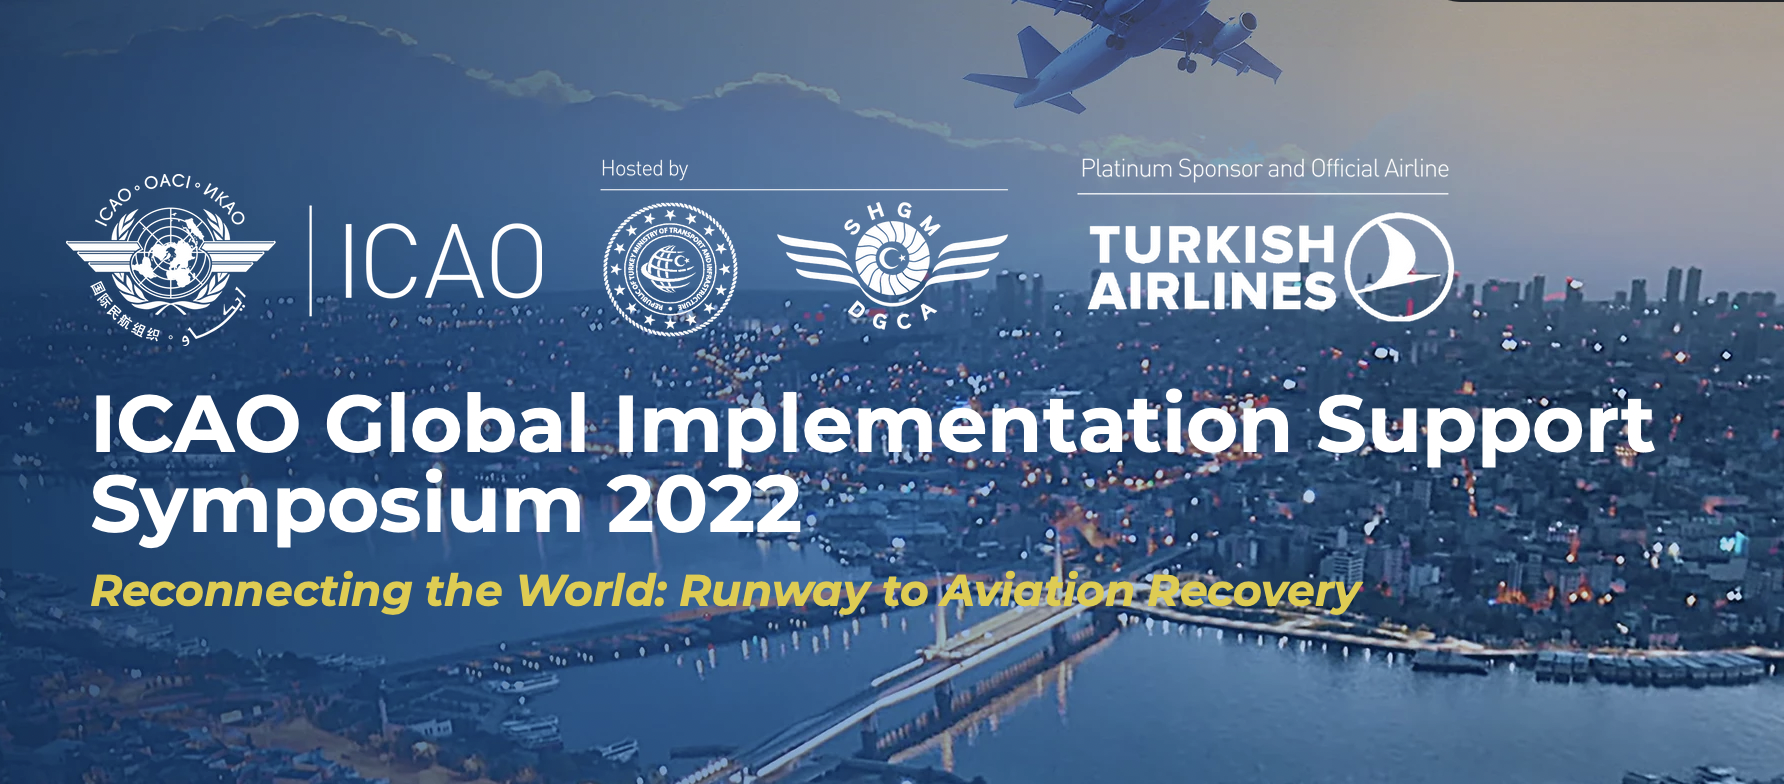 ICAO Global Implementation Support Symposium 2022